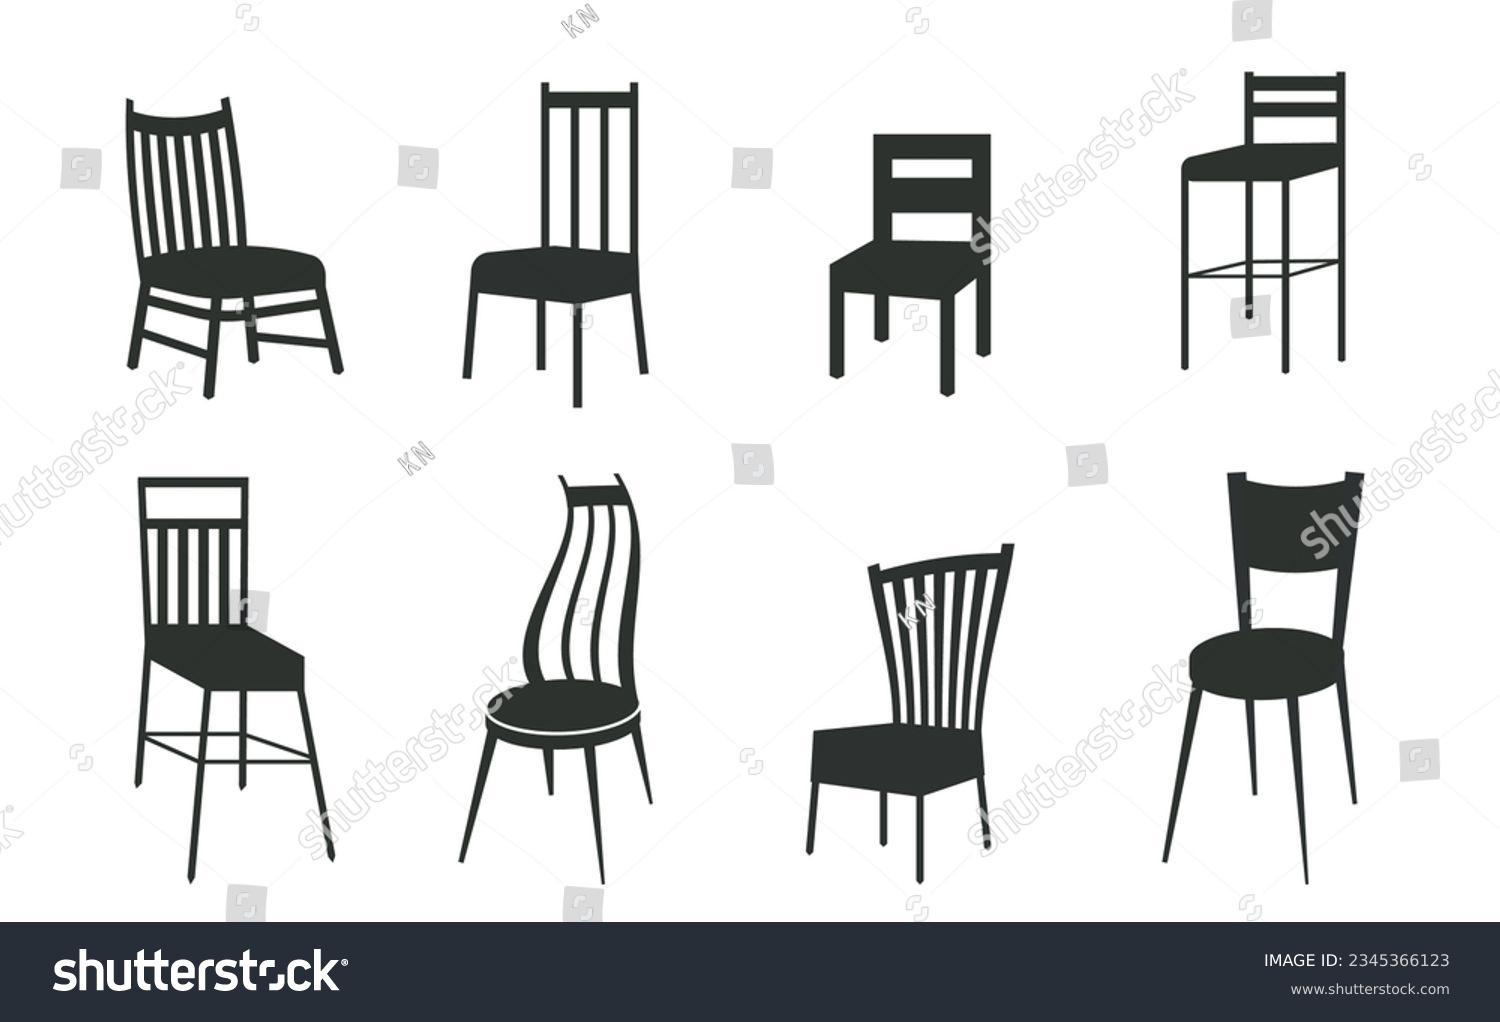 SVG of  Chair SVG, Chairs silhouettes vector illustration. Bar stool icons set cartoon vector. Chair bench. Doodle icons collection in vector. Hand drawn. svg